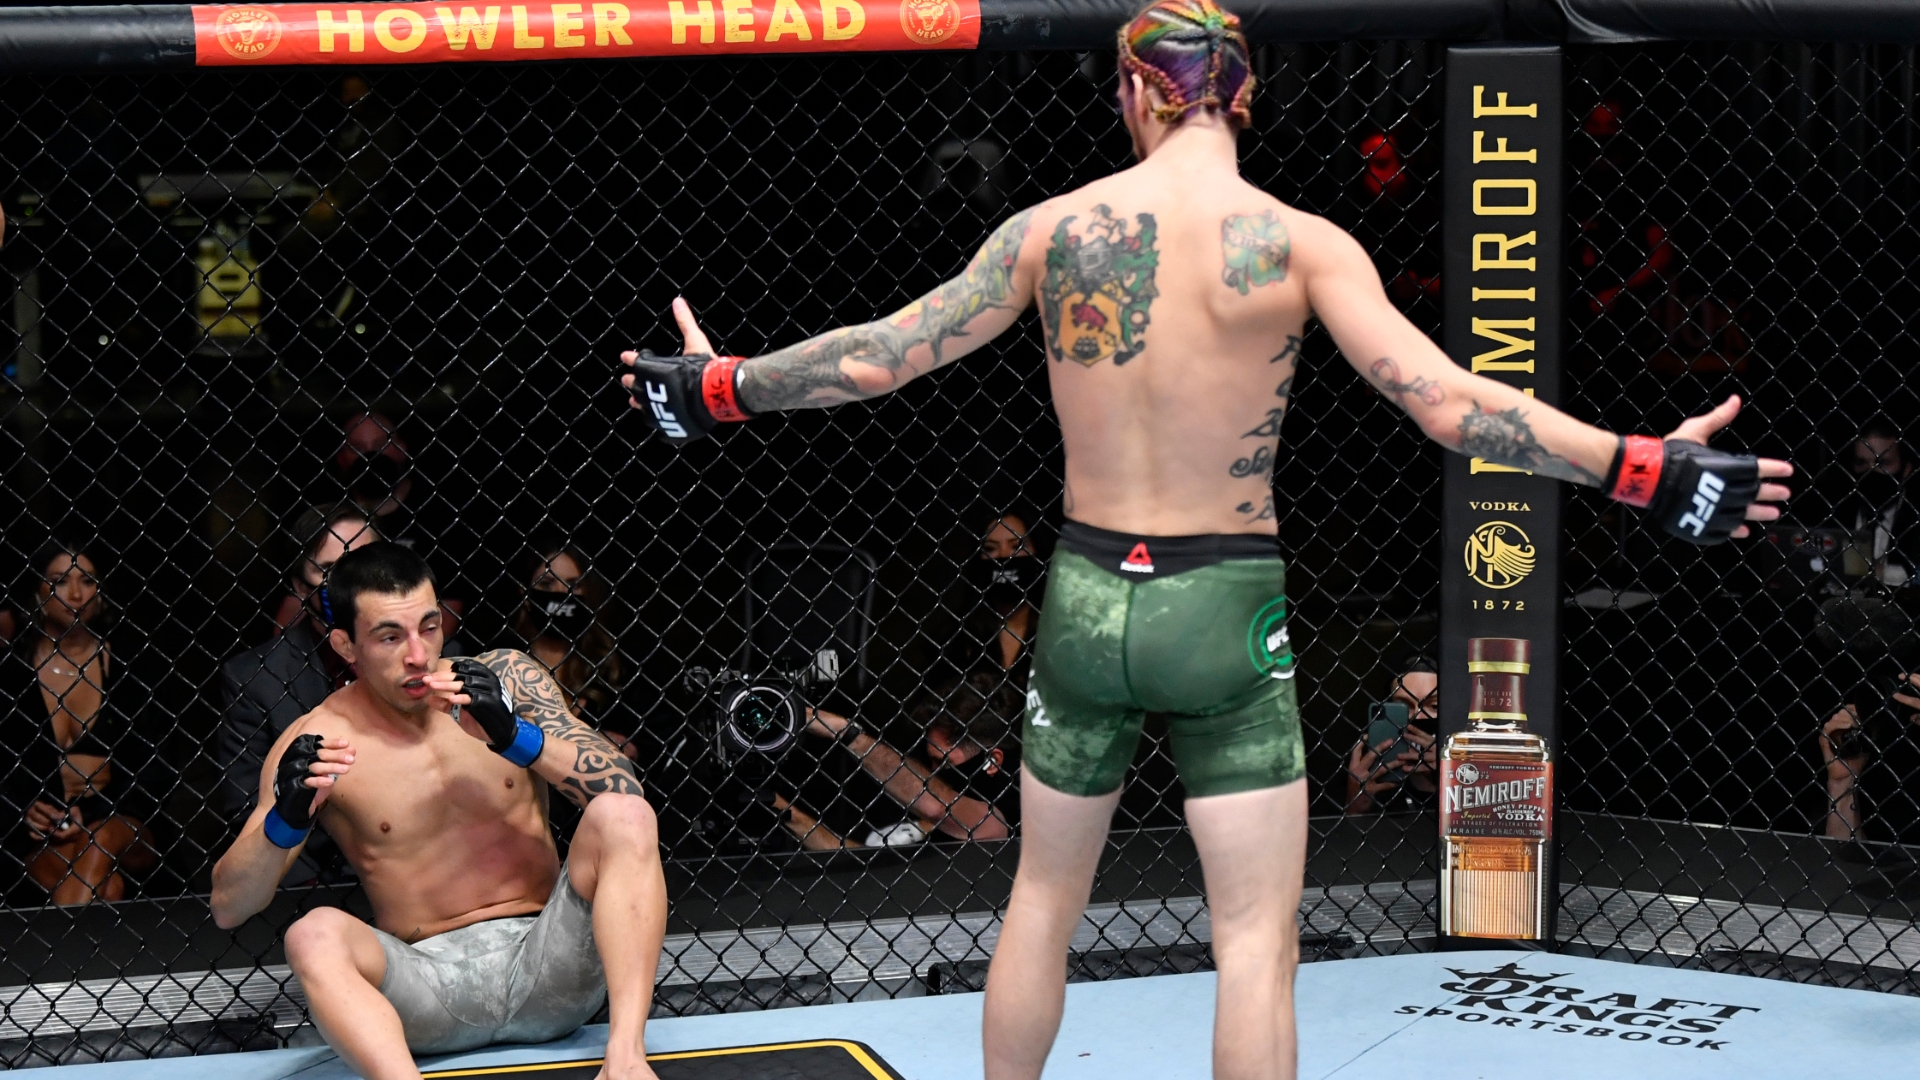 Sean O'Malley thought he won on this combo. Thomas Almeida had other thoughts